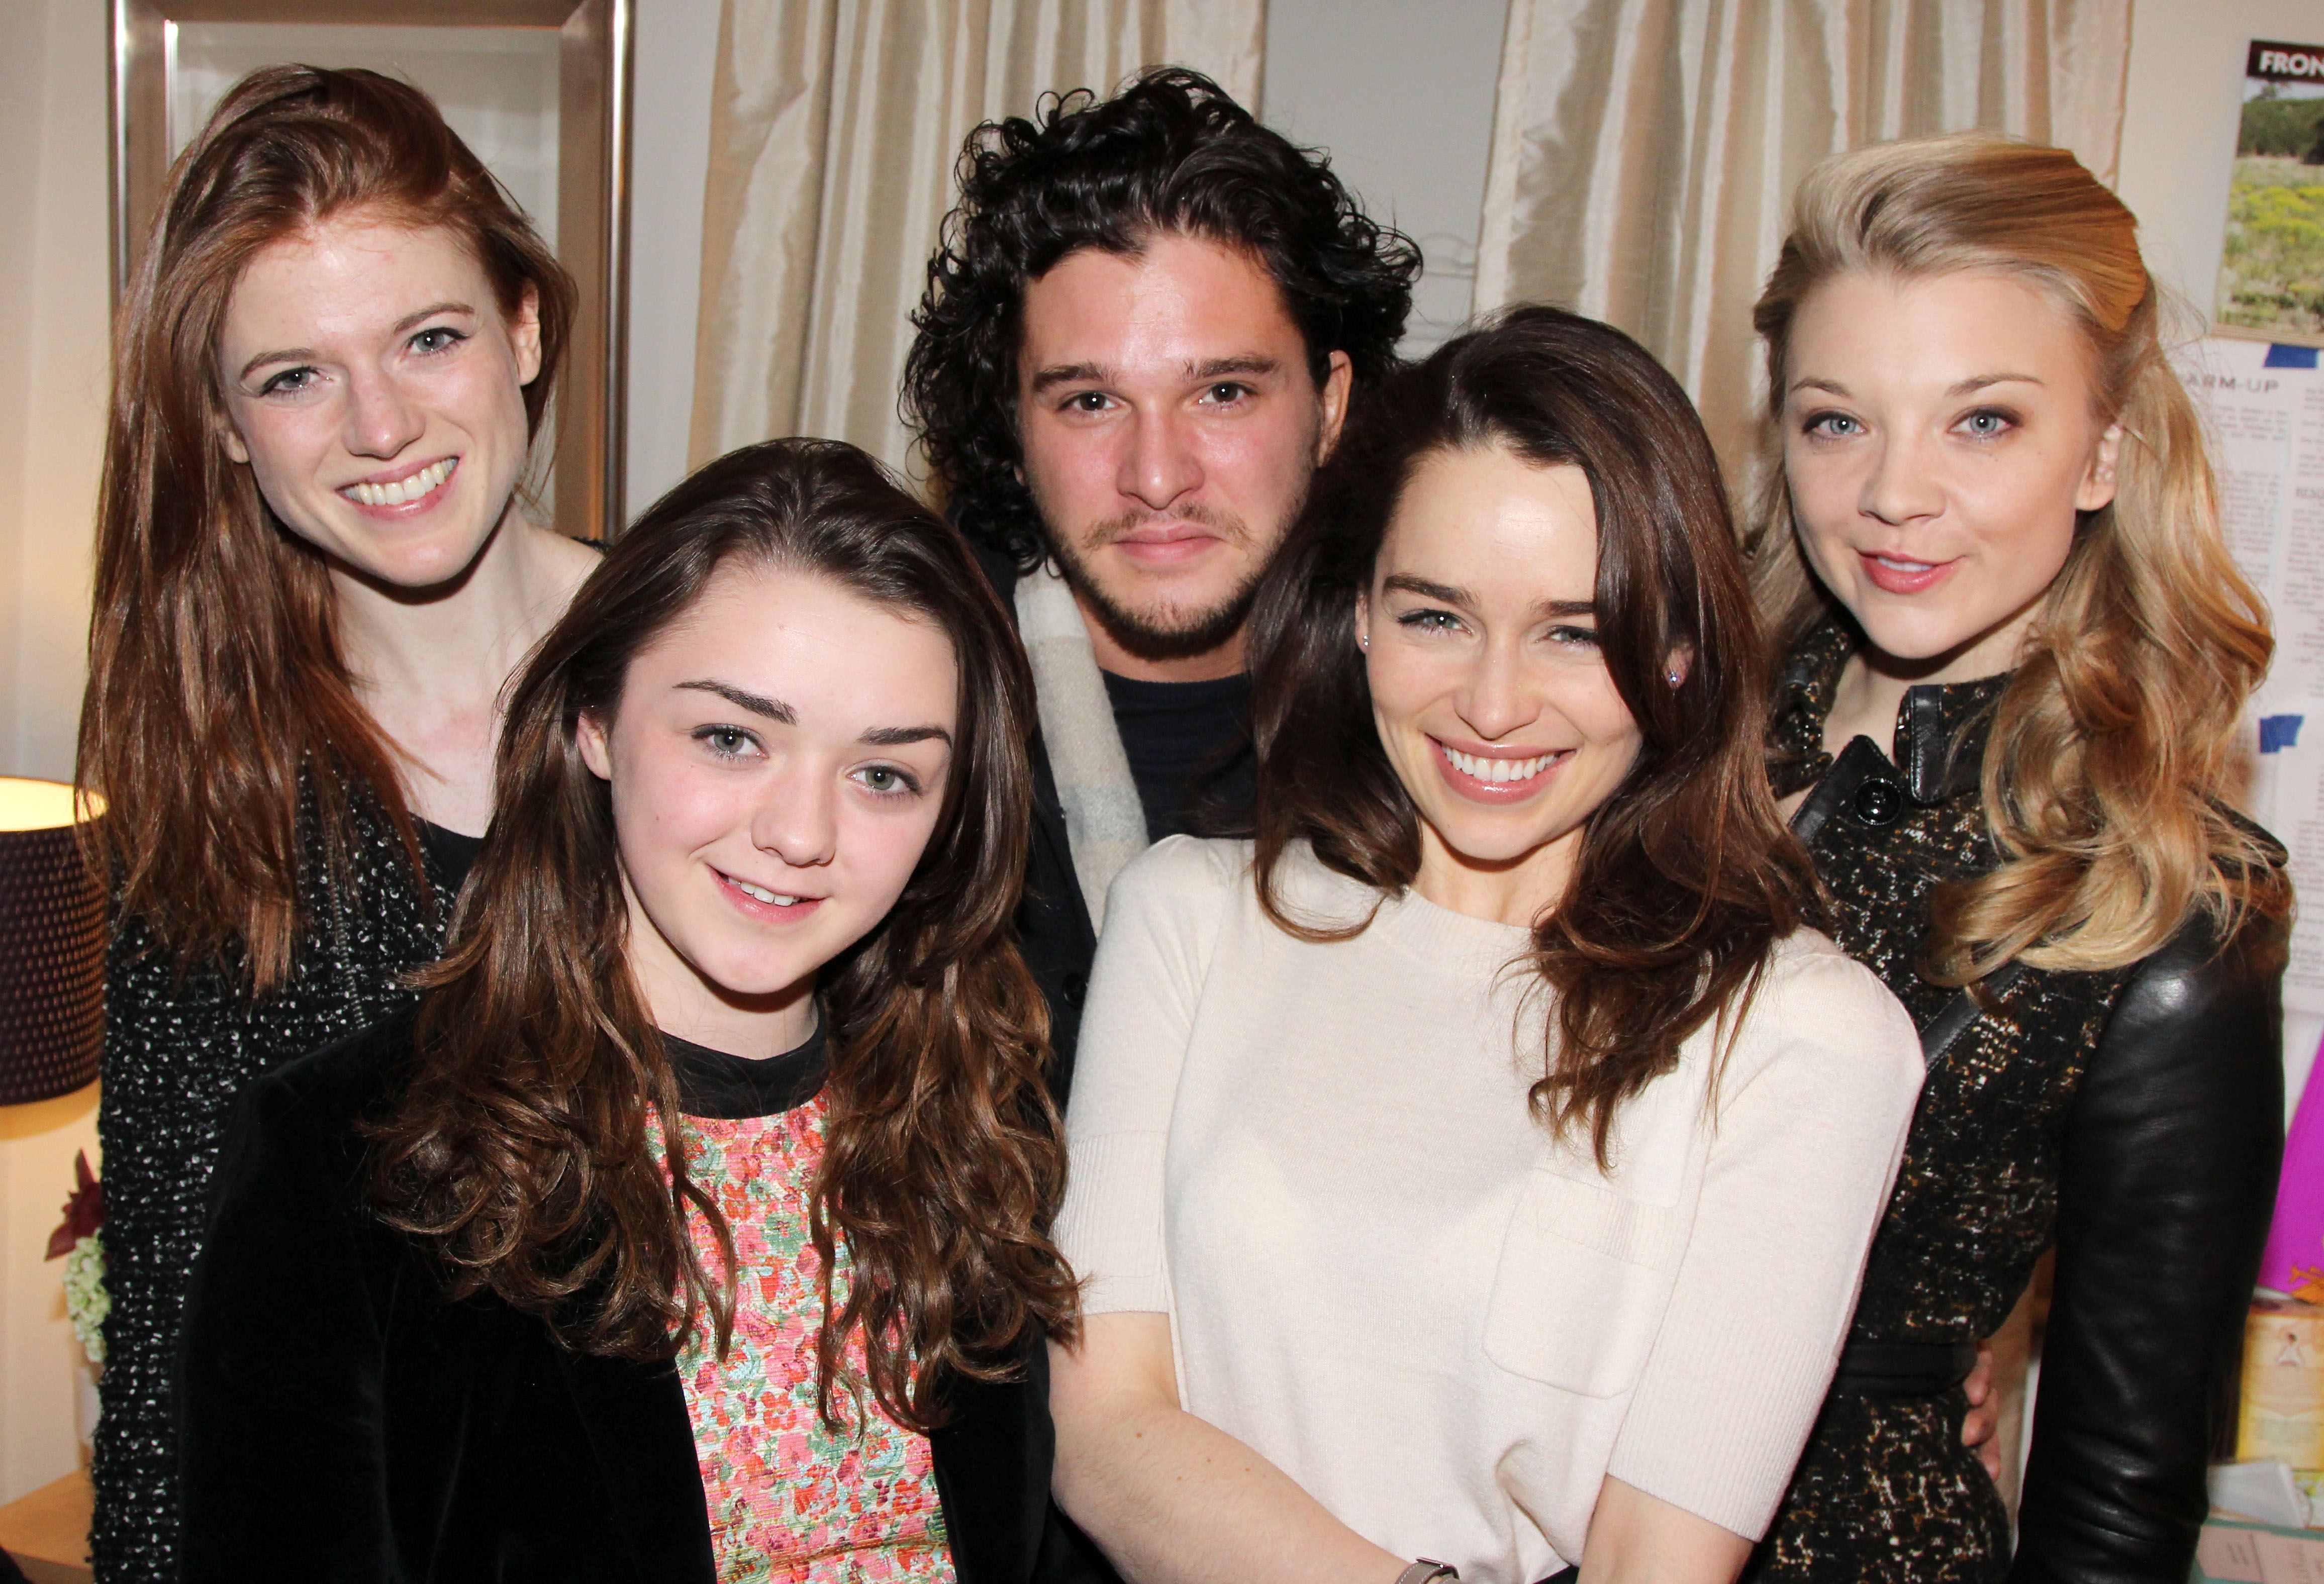 Cast Of Game Of Thrones And What They Are Up to These Days